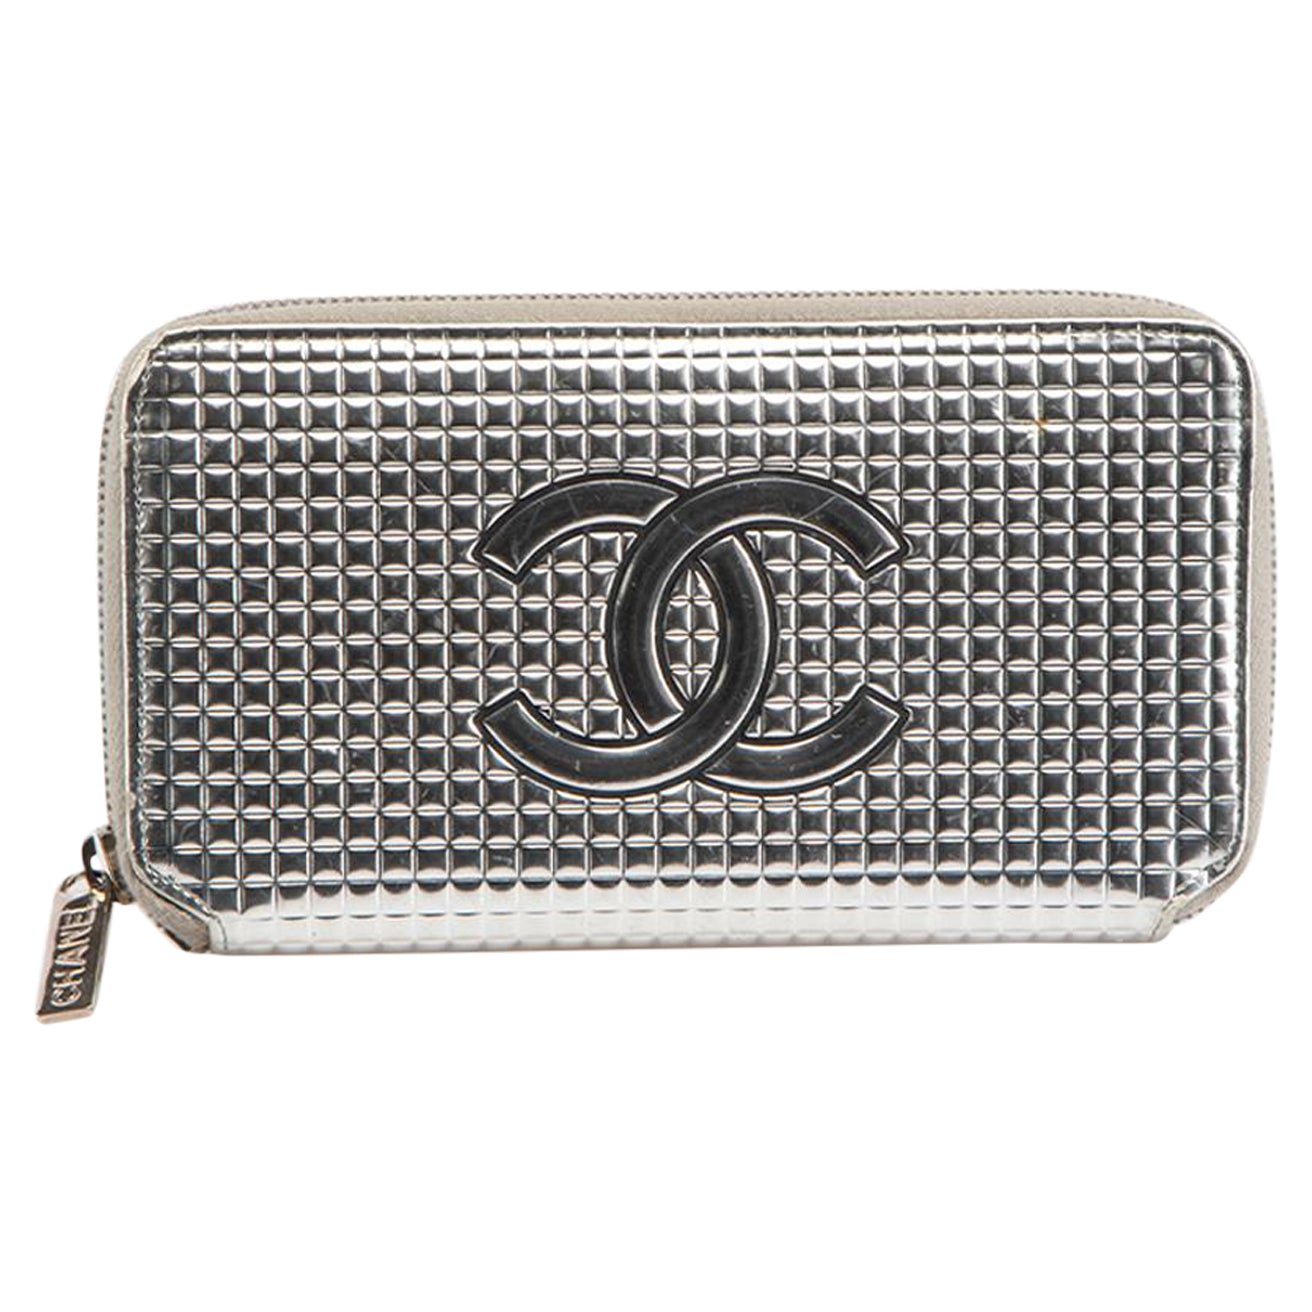 Chanel 2006-08 Silver Leather Micro Chocolate Bar Continental Wallet